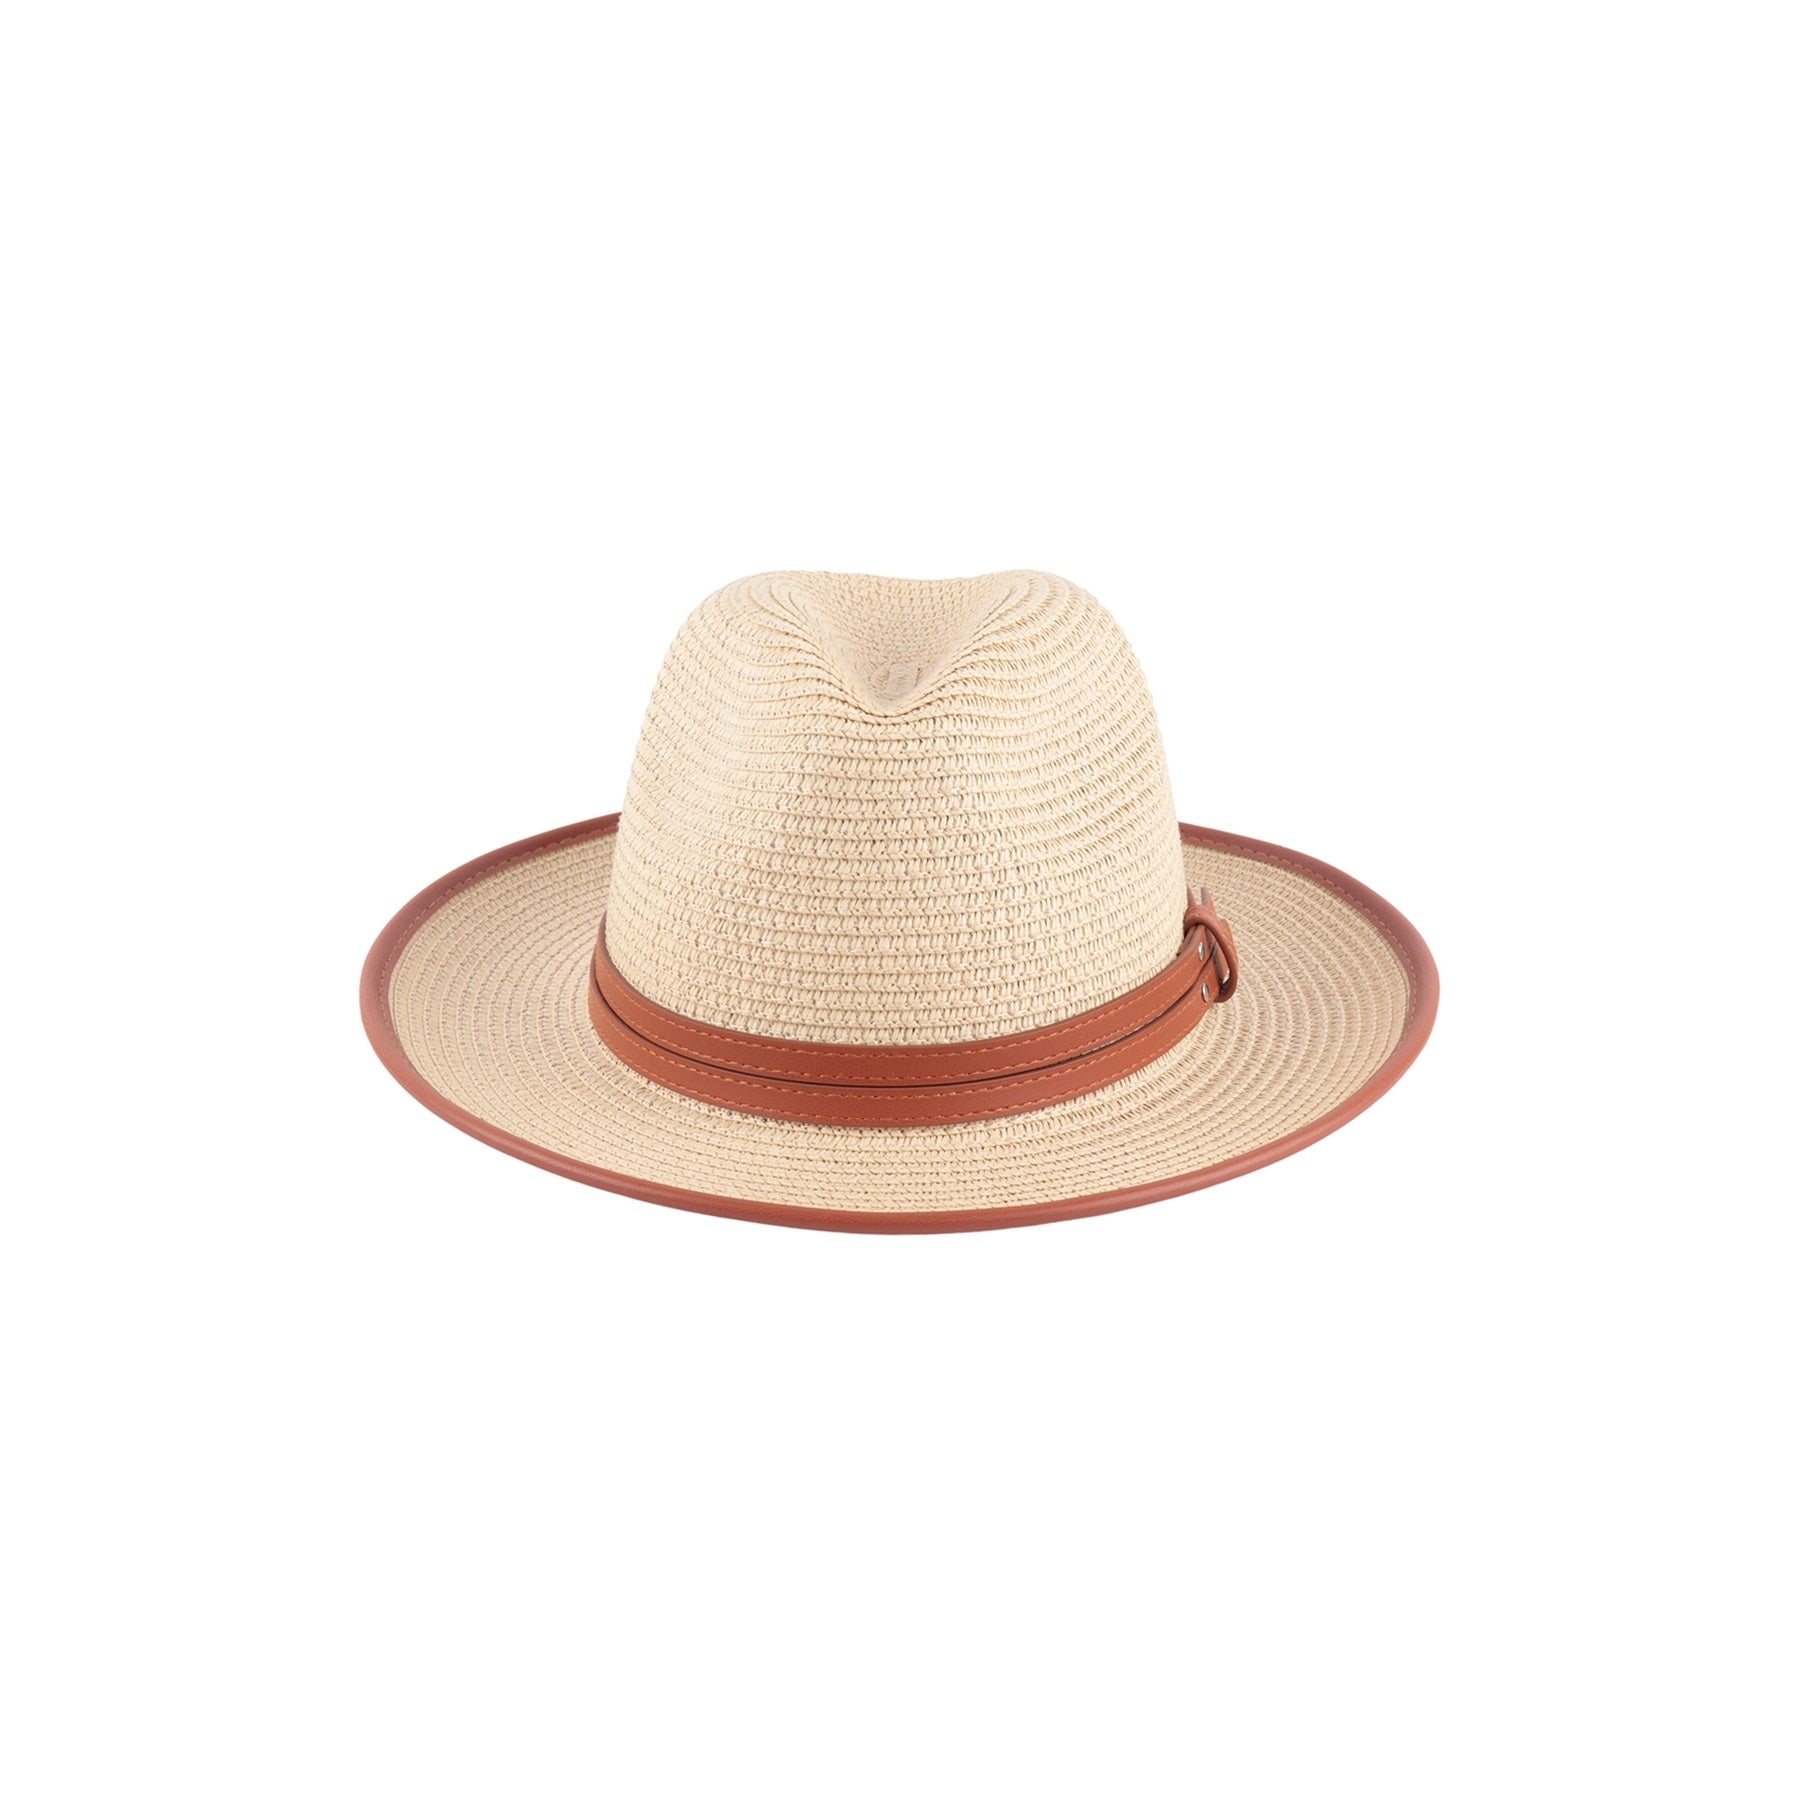 Fedora Summer Hat with Leather Trim